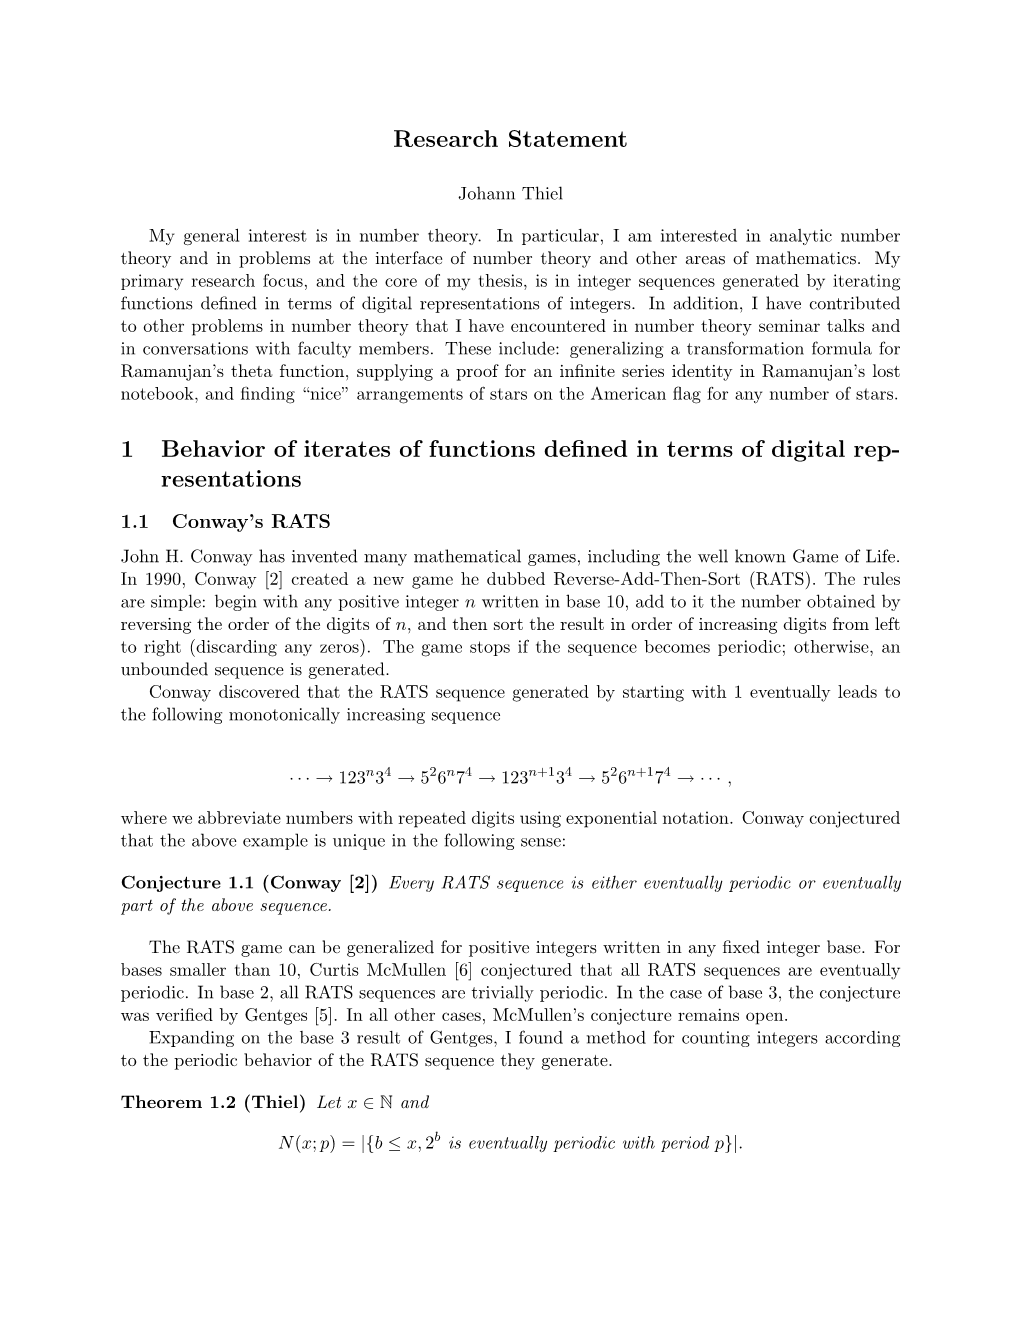 Research Statement 1 Behavior of Iterates of Functions